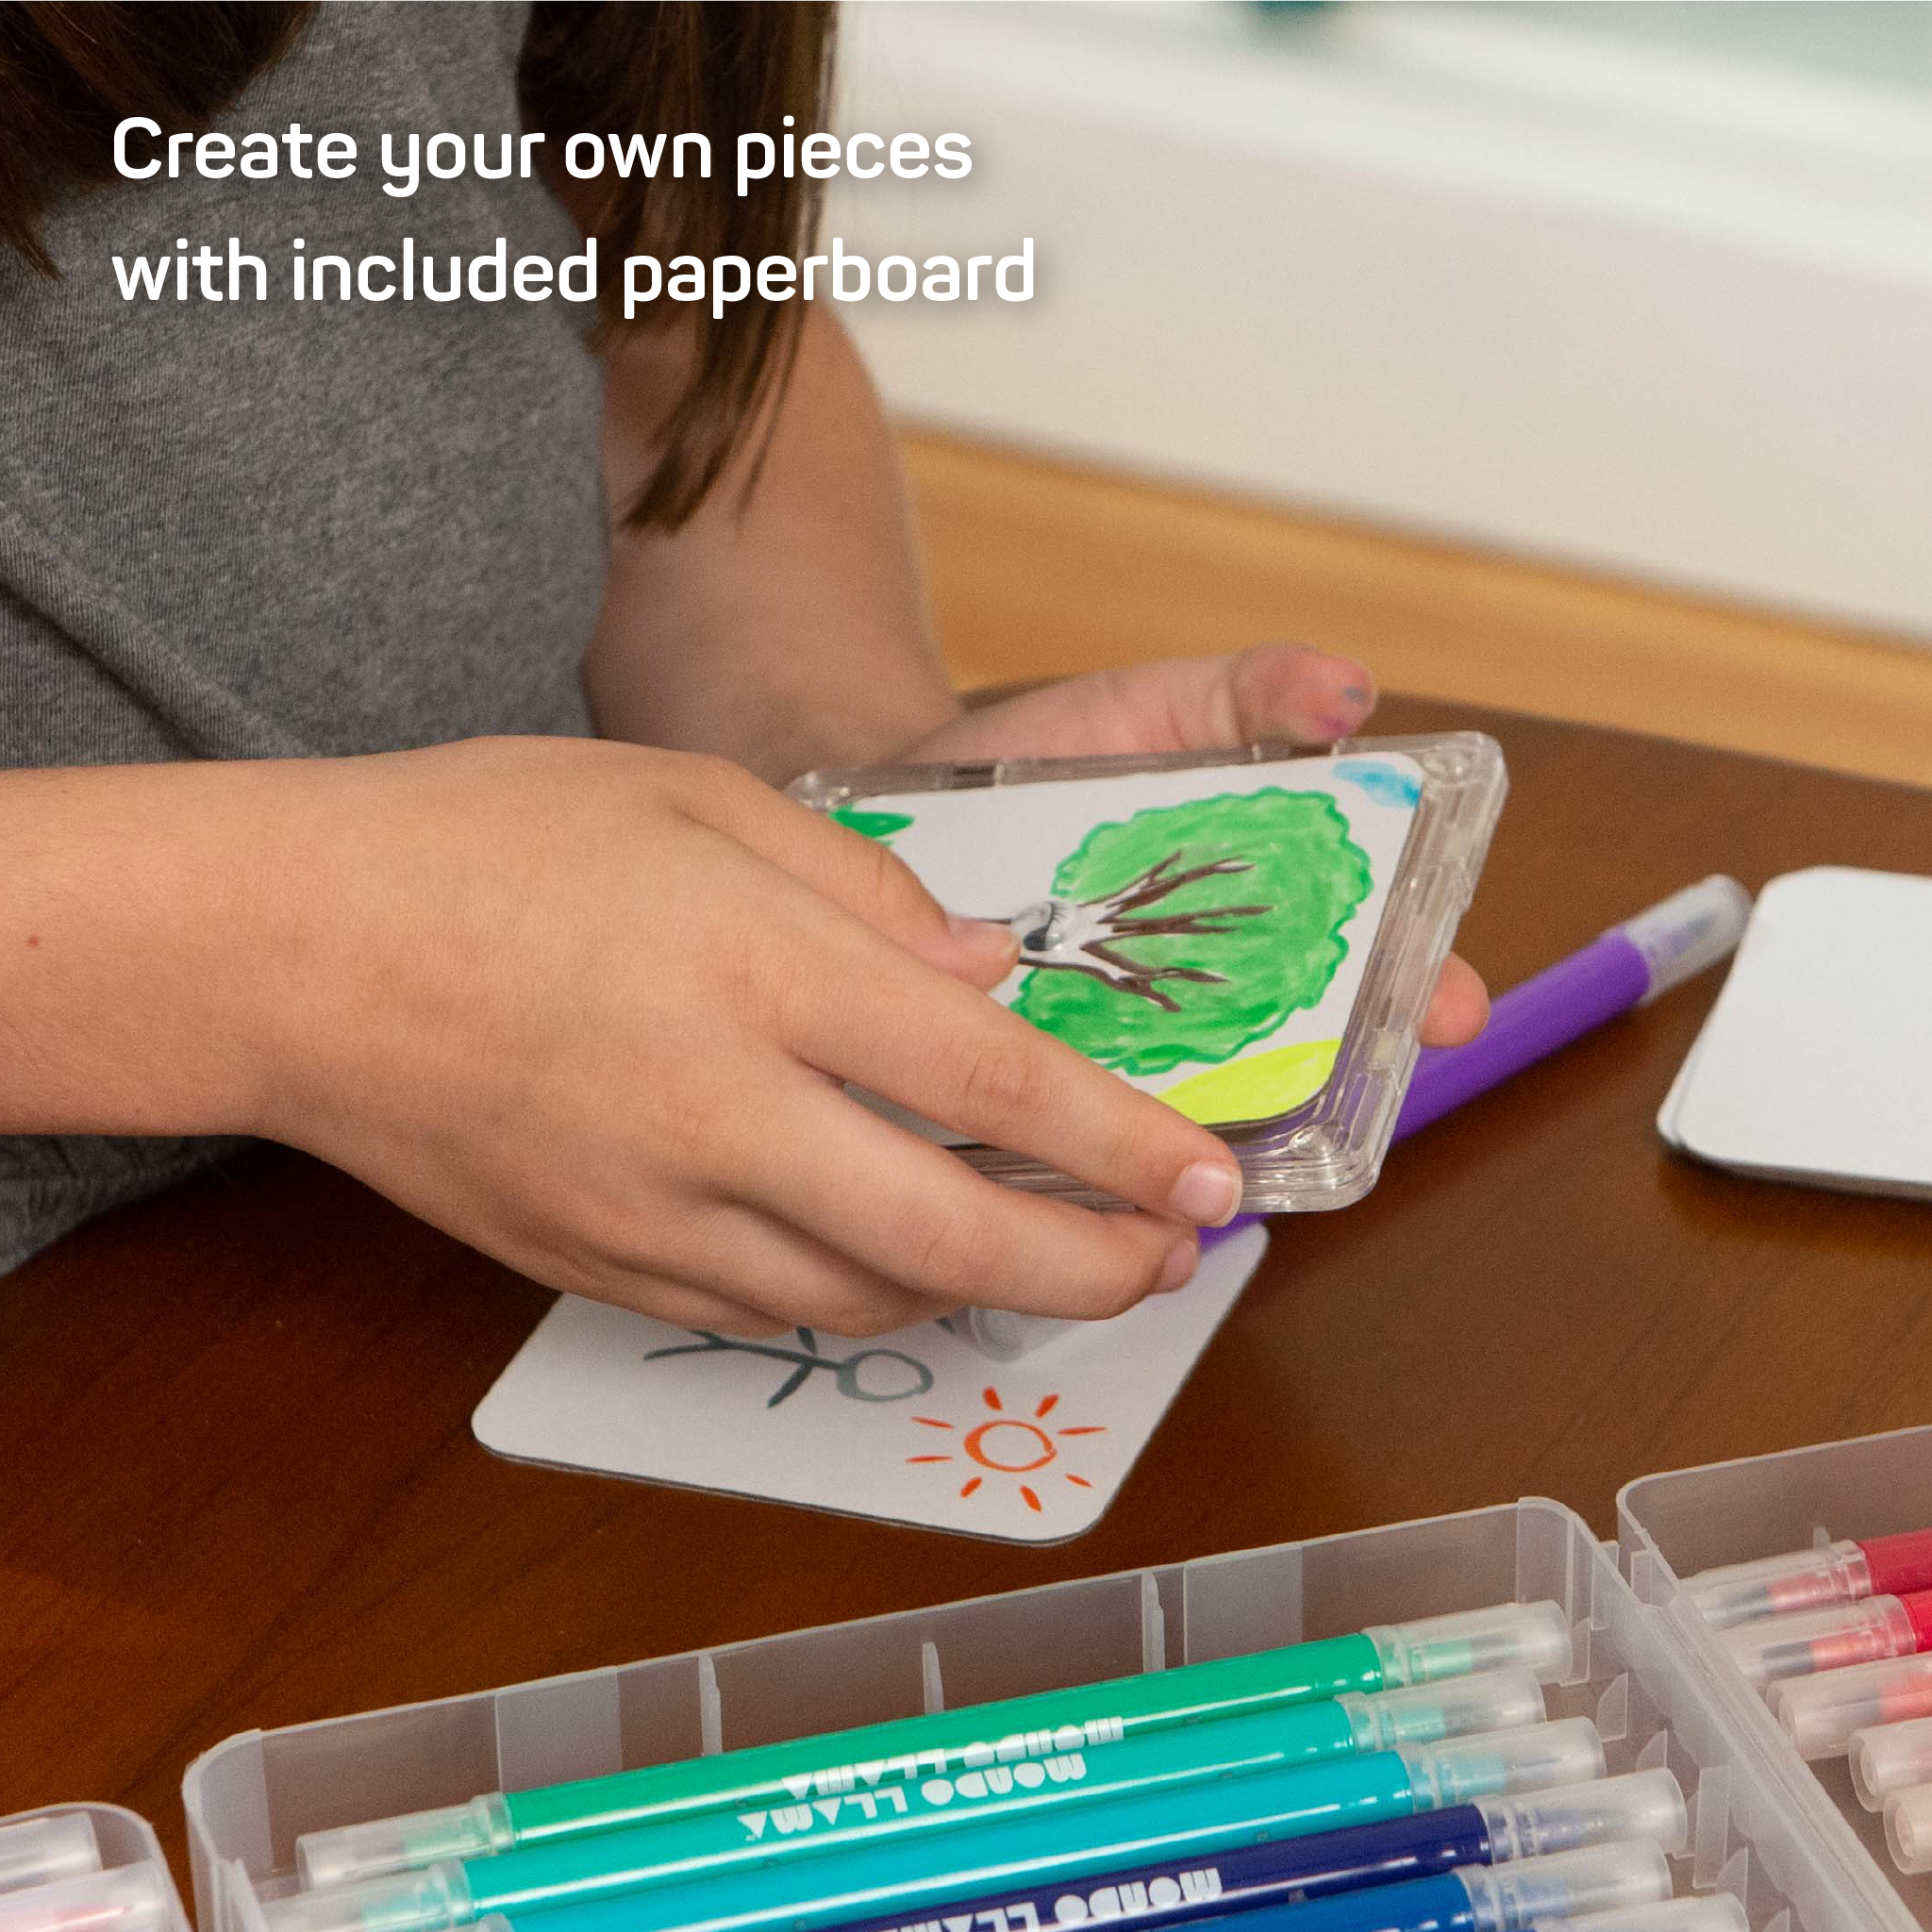 Child placing paperboard panel with drawing of a tree into a square frame. Text which reads "Create your own pieces with included paperboard"